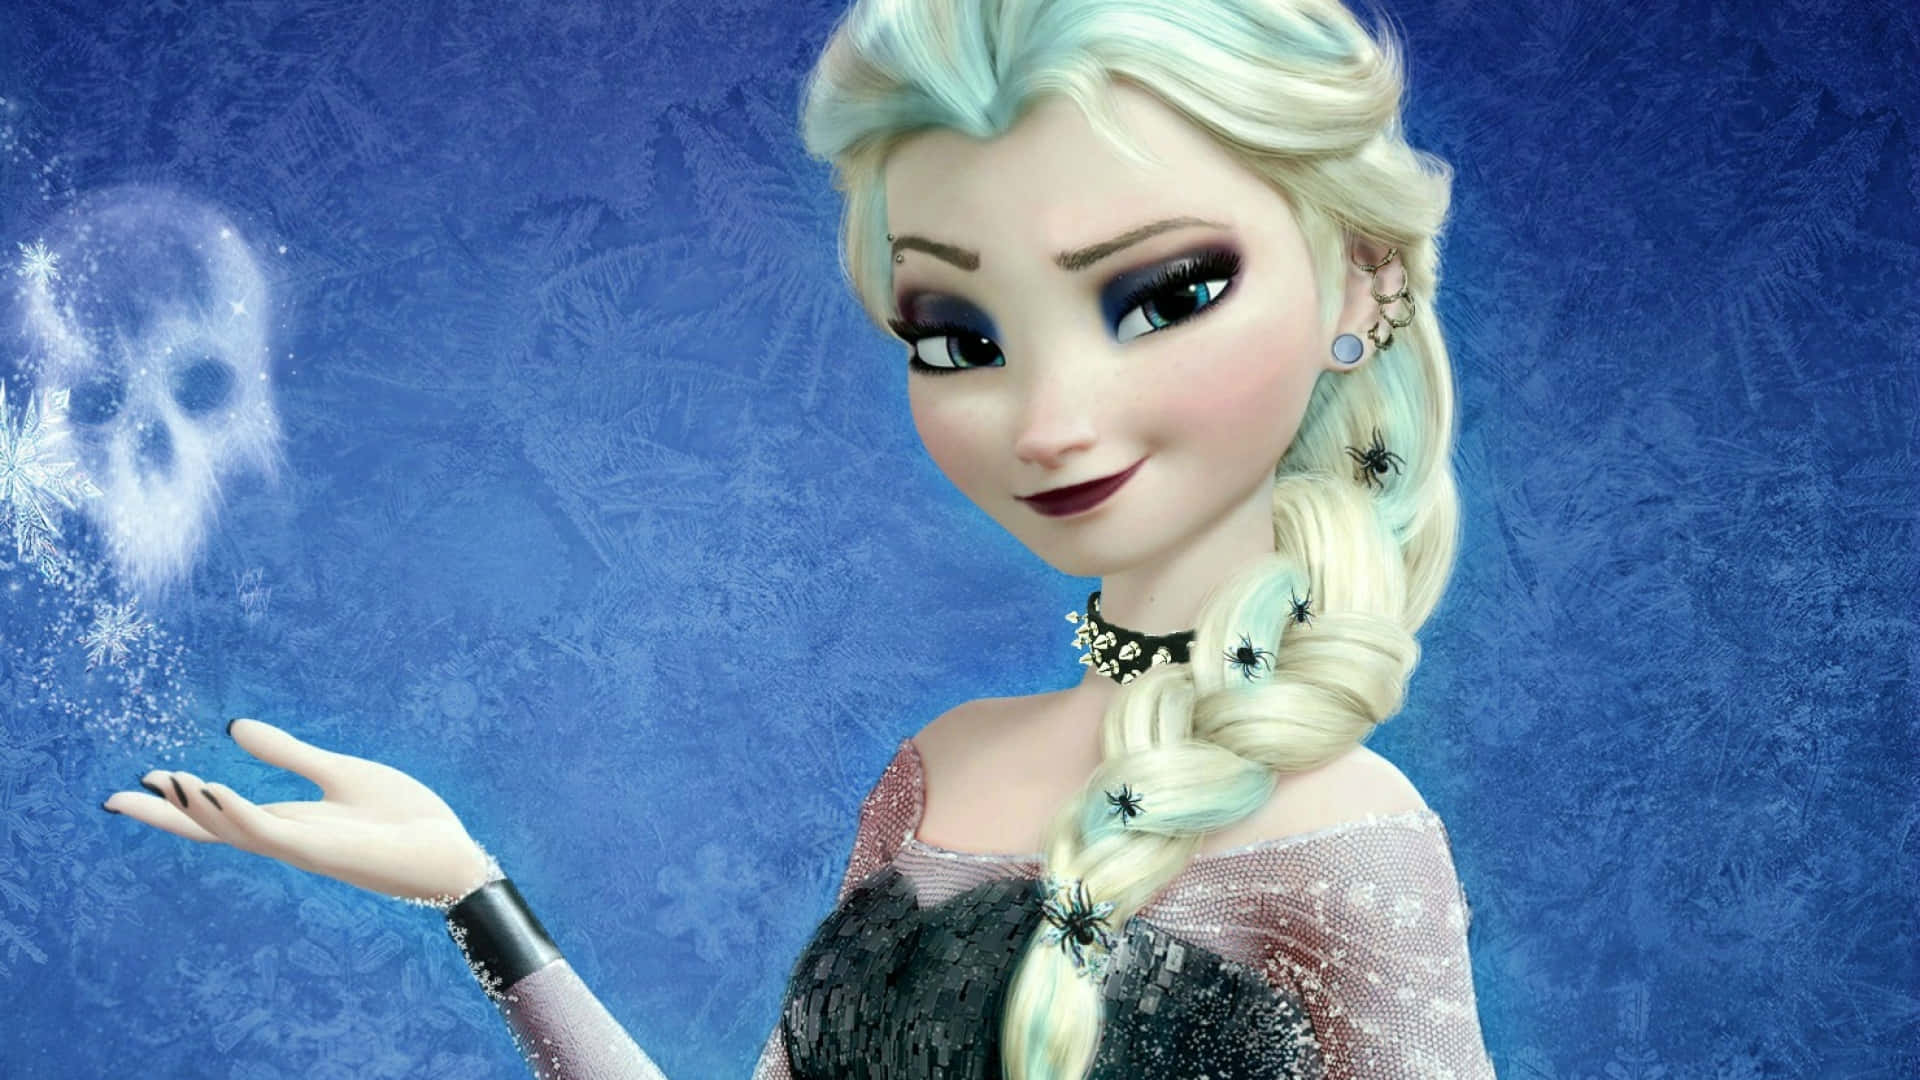 Follow Elsa, Anna and Olaf on a magical and unforgettable journey of love and adventure.